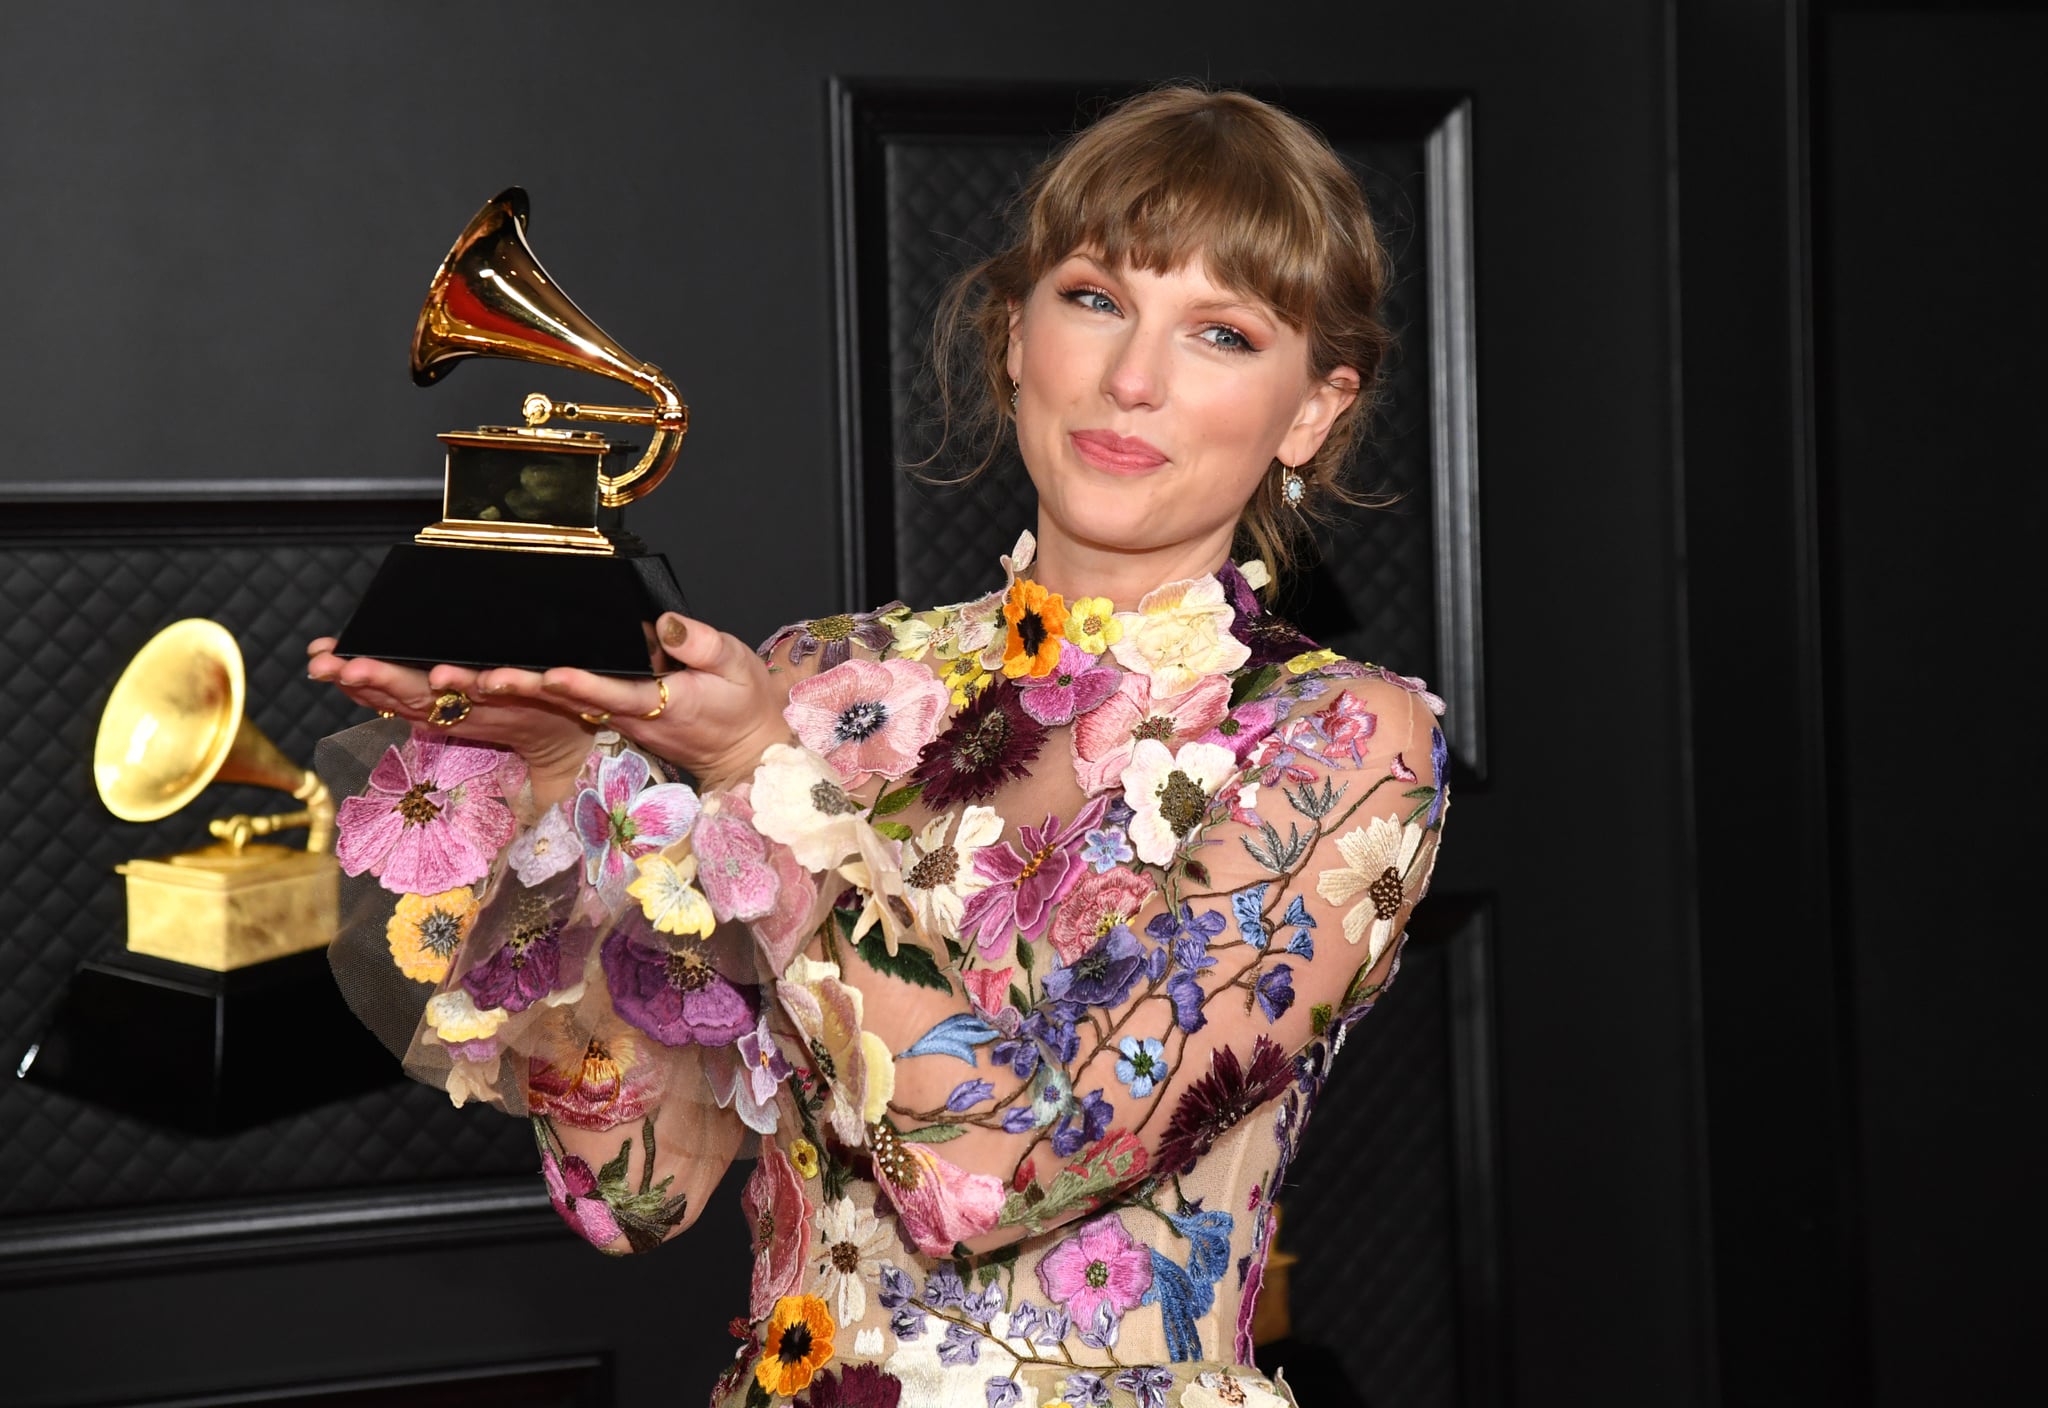 Why Taylor Swift's Rereleased Albums Aren't Grammy Nominated